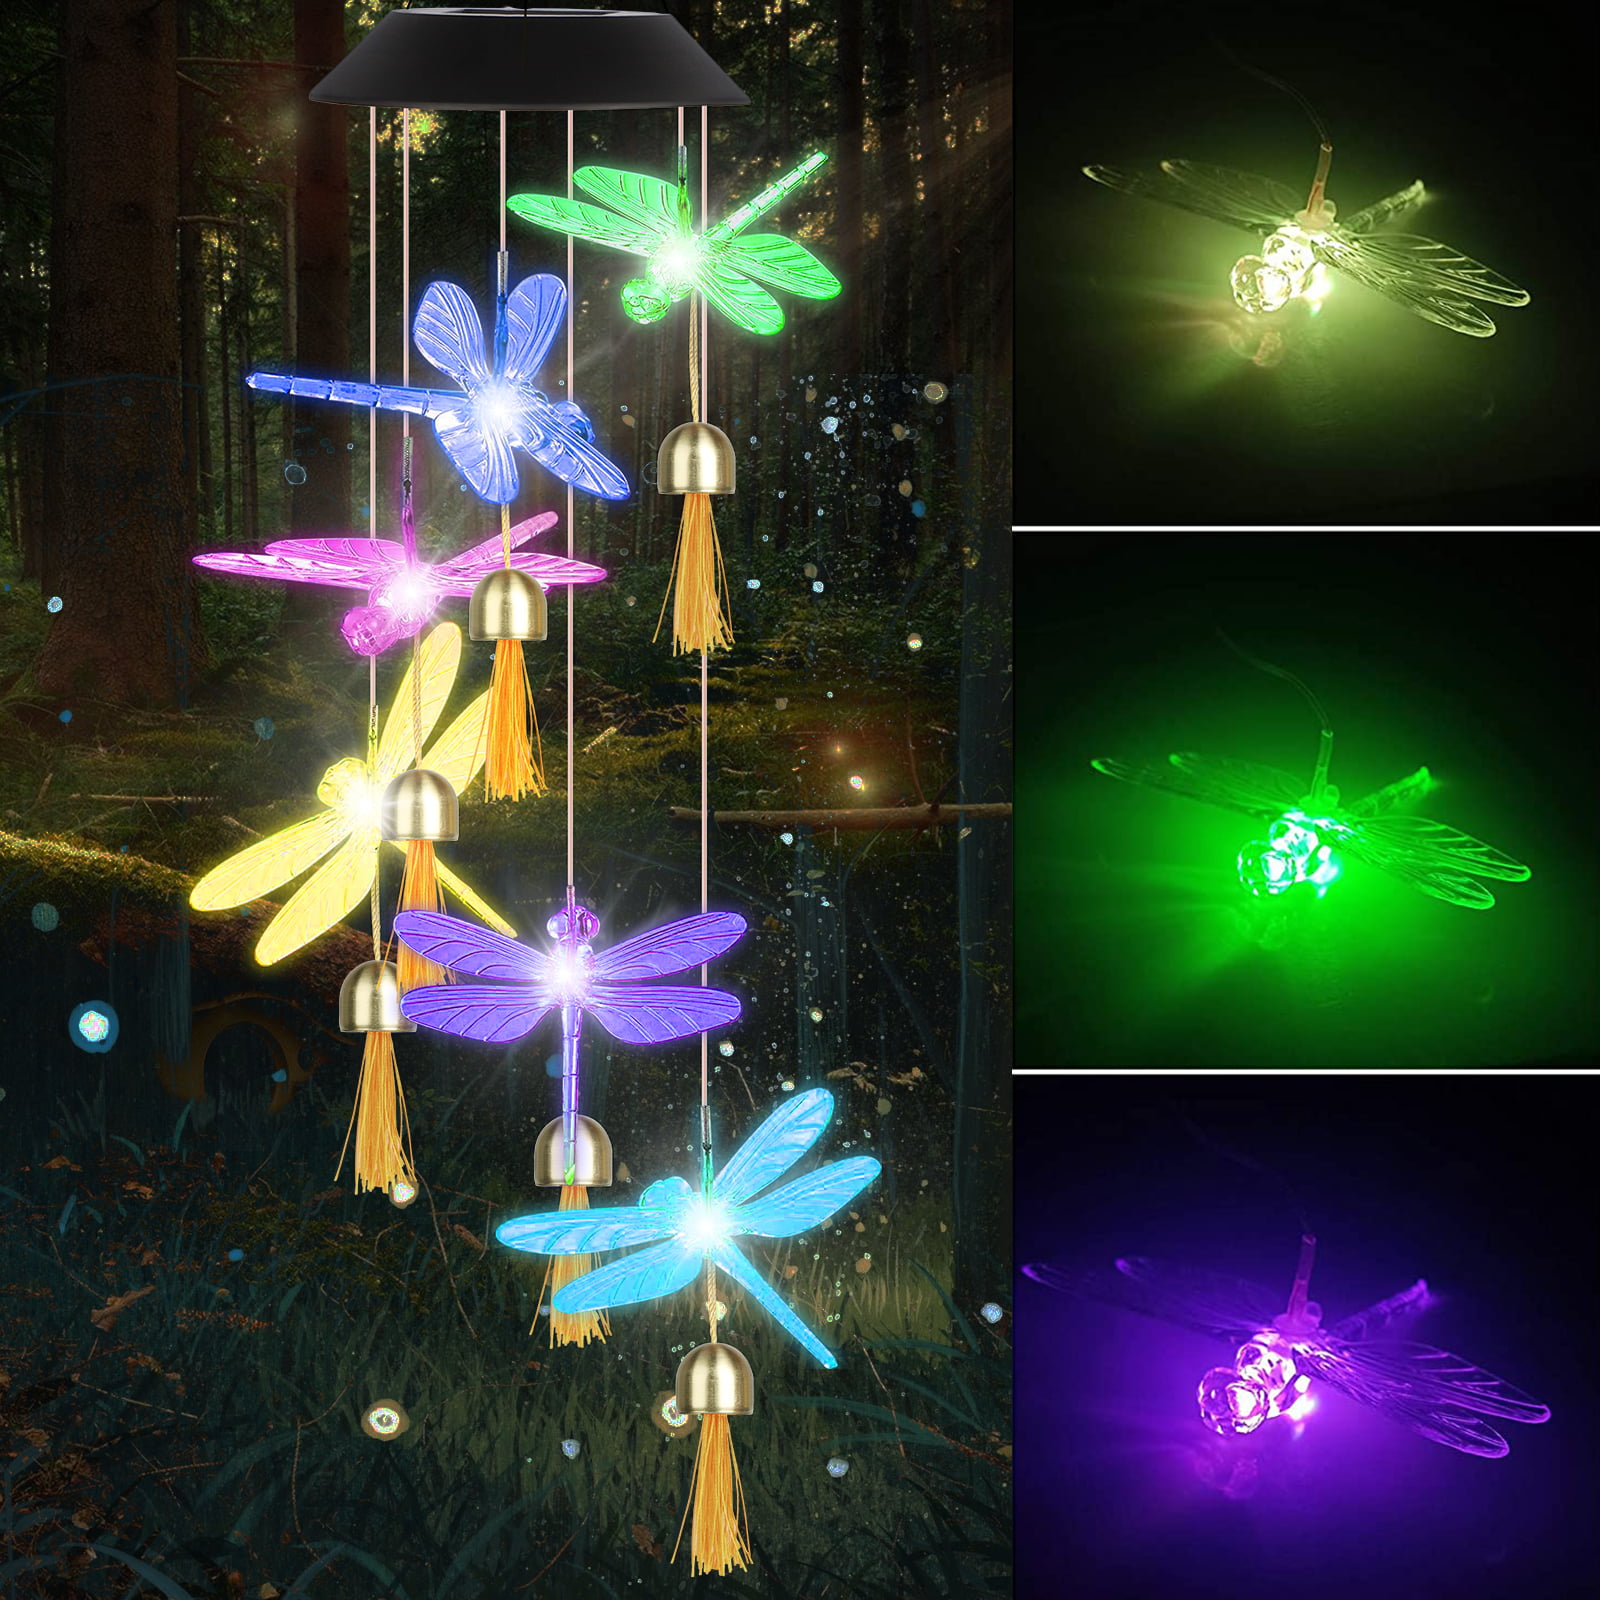 Dragonfly LED Color Changing Power Solar Wind Chimes Yard Home Garden Decor Lamp 